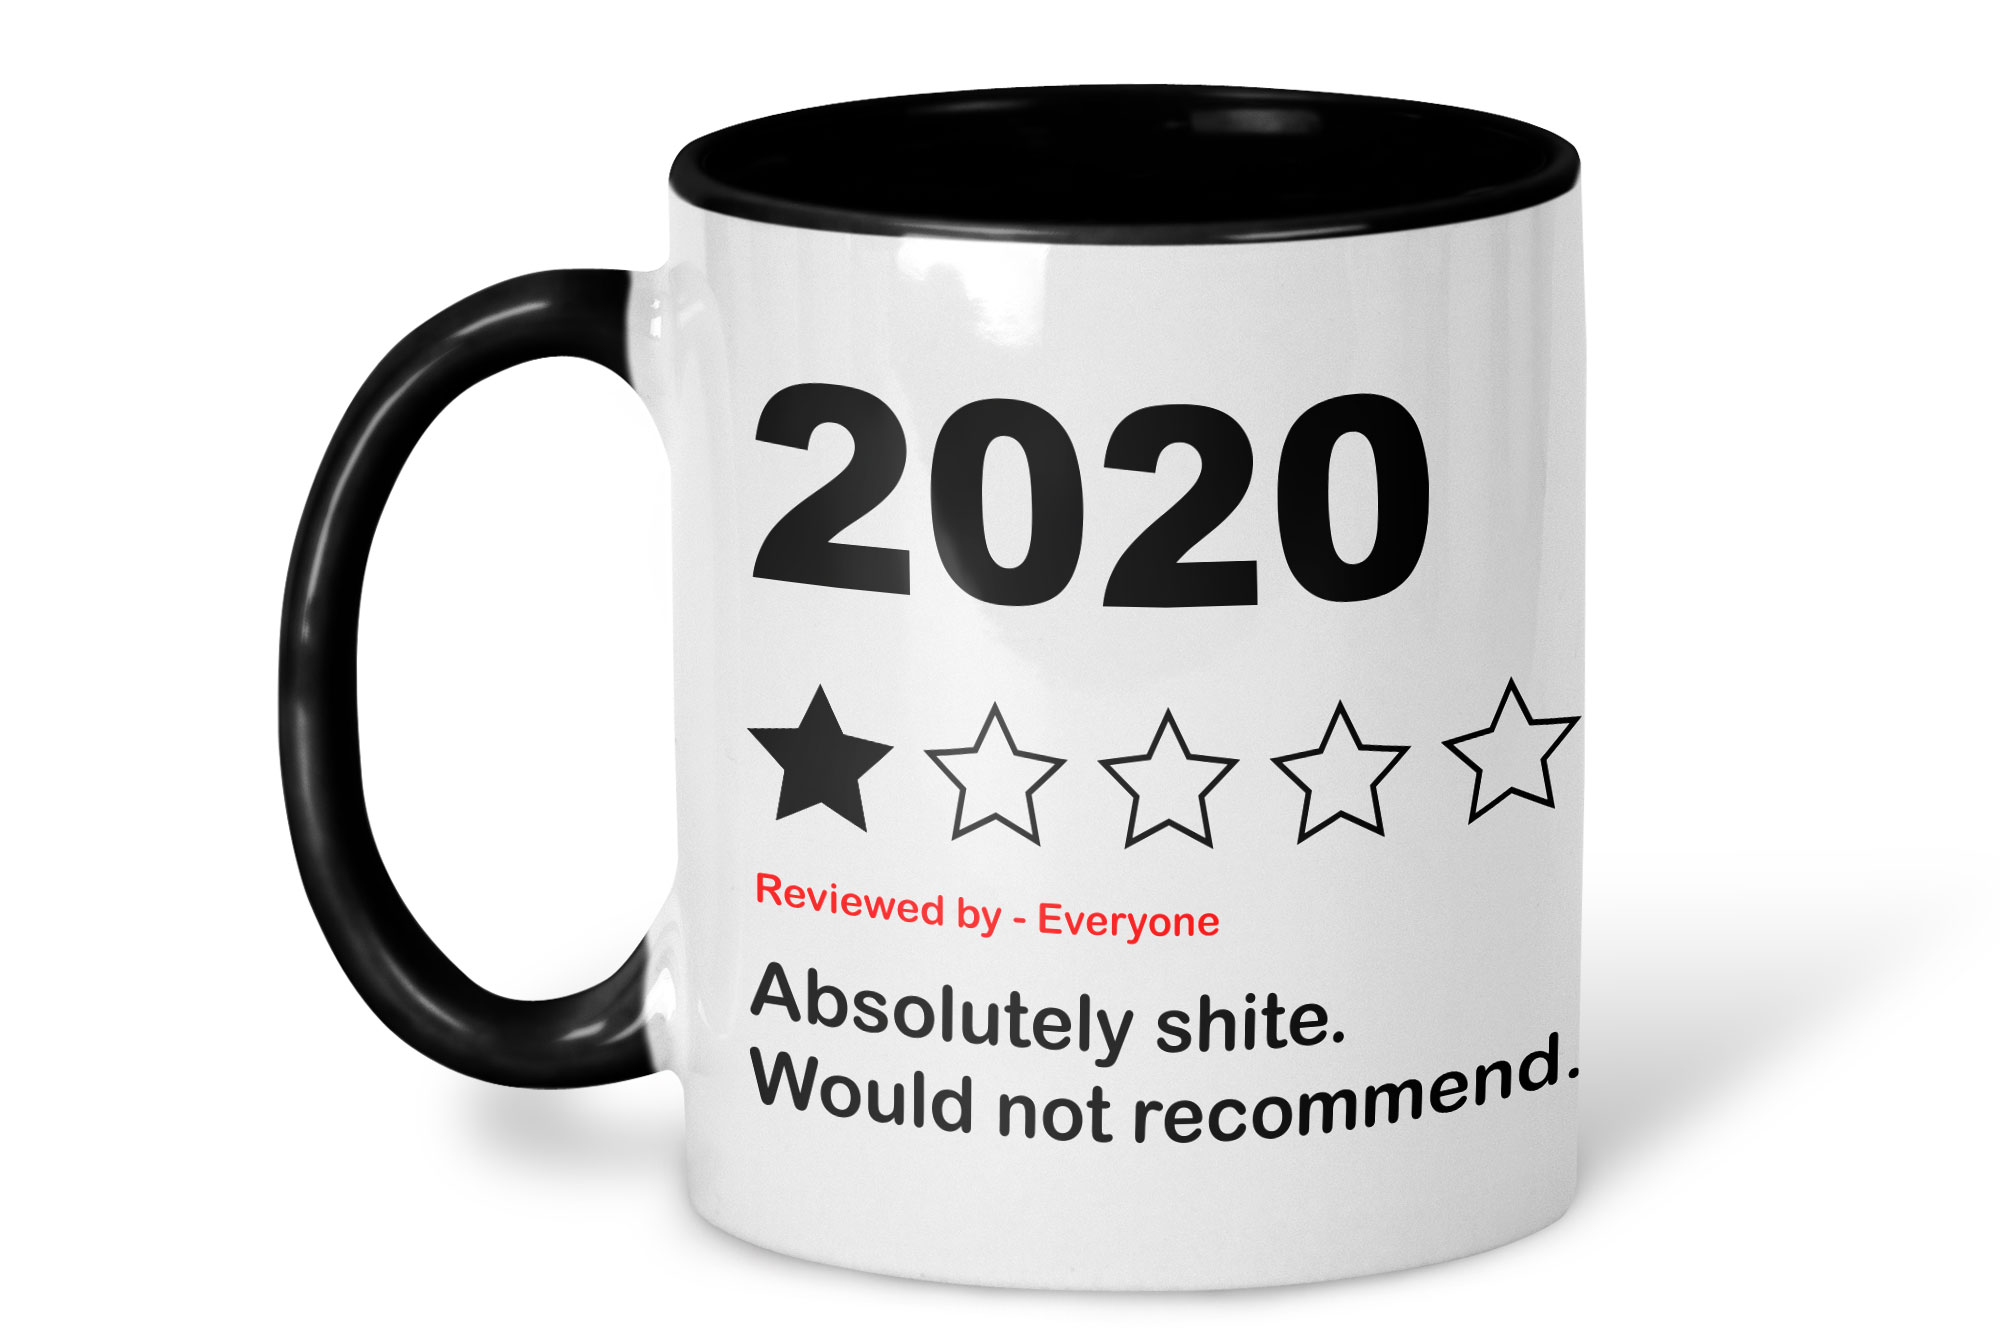 2020 review mug on a white background